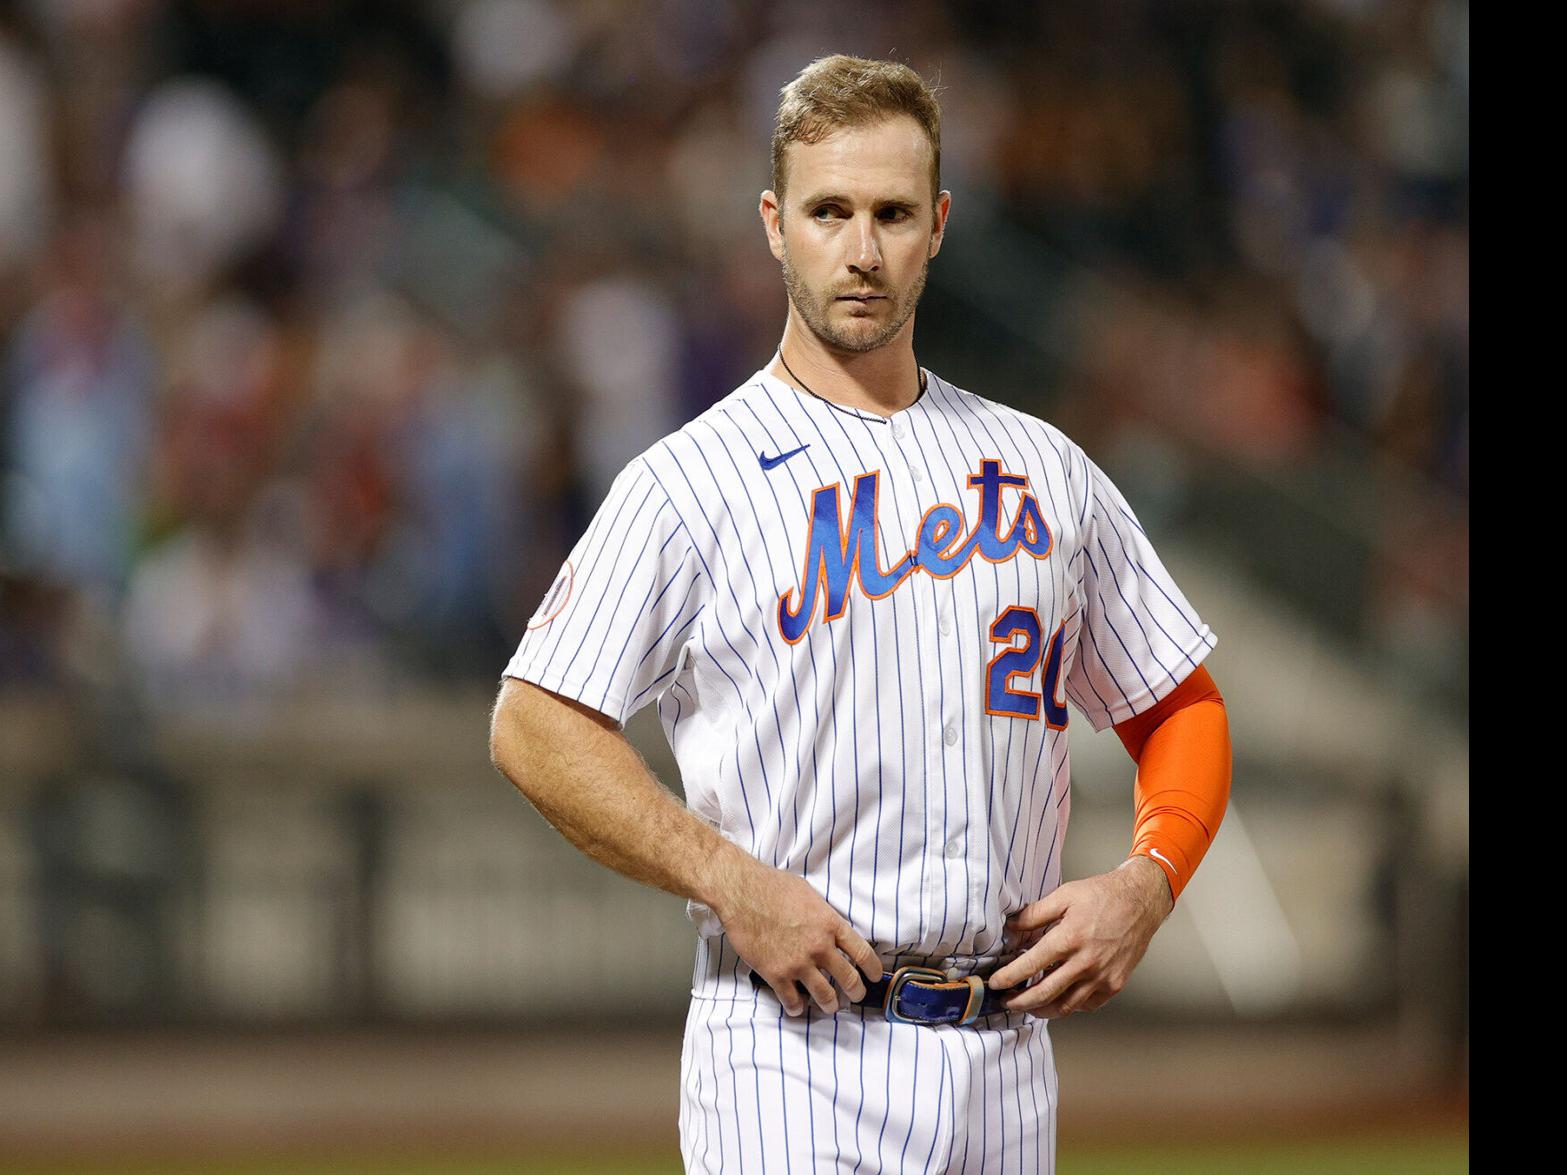 Mets star Pete Alonso says he is thankful to be alive after his truck was  hit and flipped several times, Pro Sports